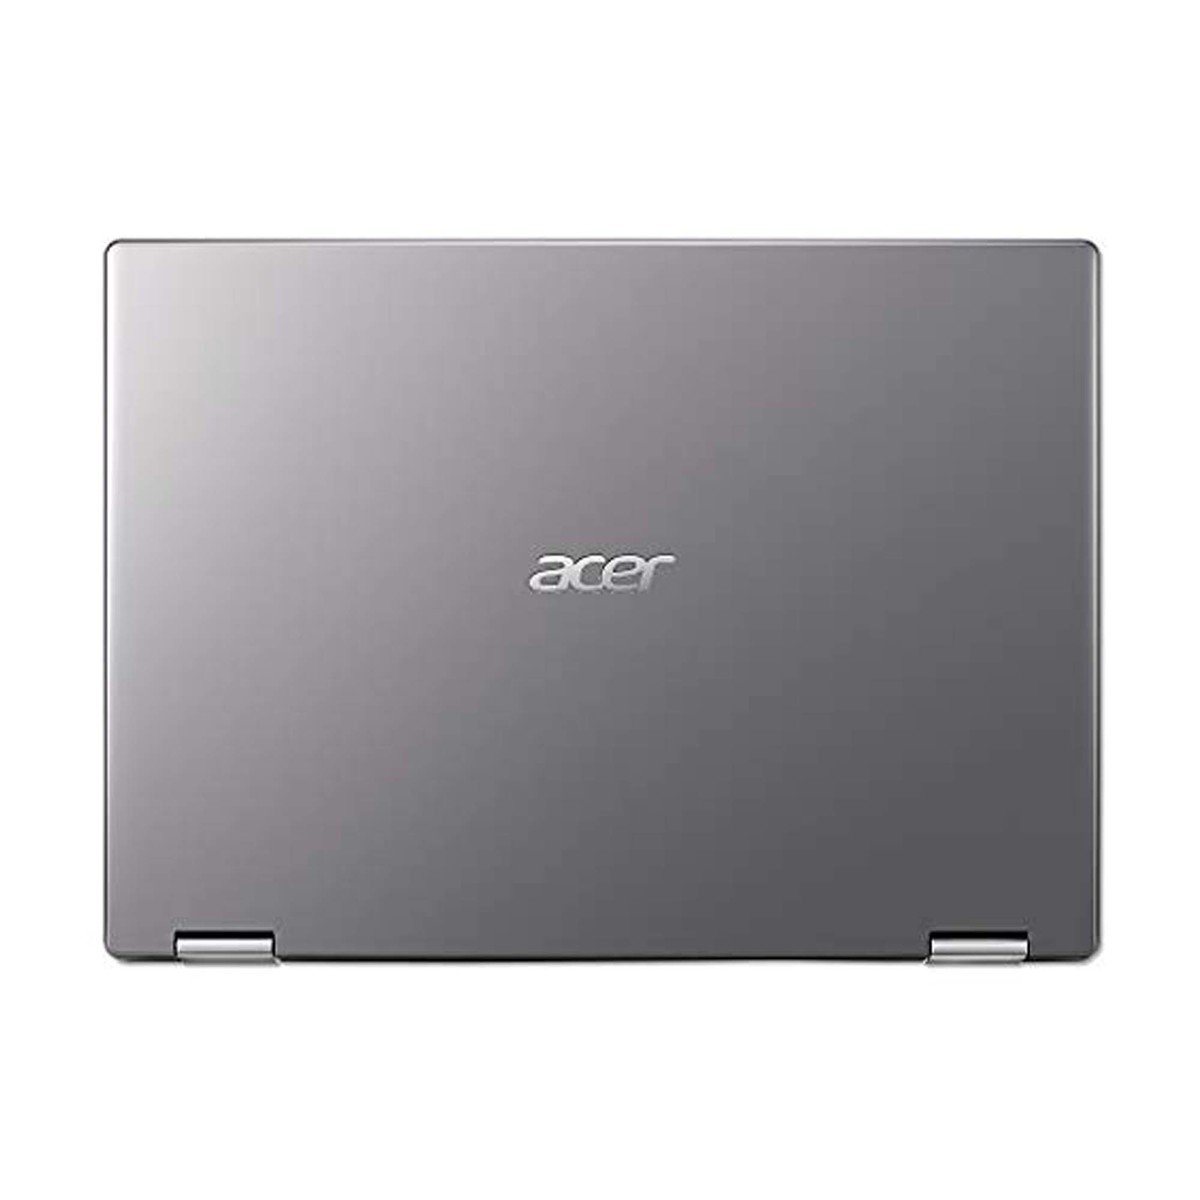 Acer Spin 3-SP314-53GN-579N Convertible 2-In-1 Laptop, Intel Core i5-8265U,8GB RAM DDR4,256GB SSD+1TB HDD,2GB MX230,14" FHD,Windows 10 Home,Silver